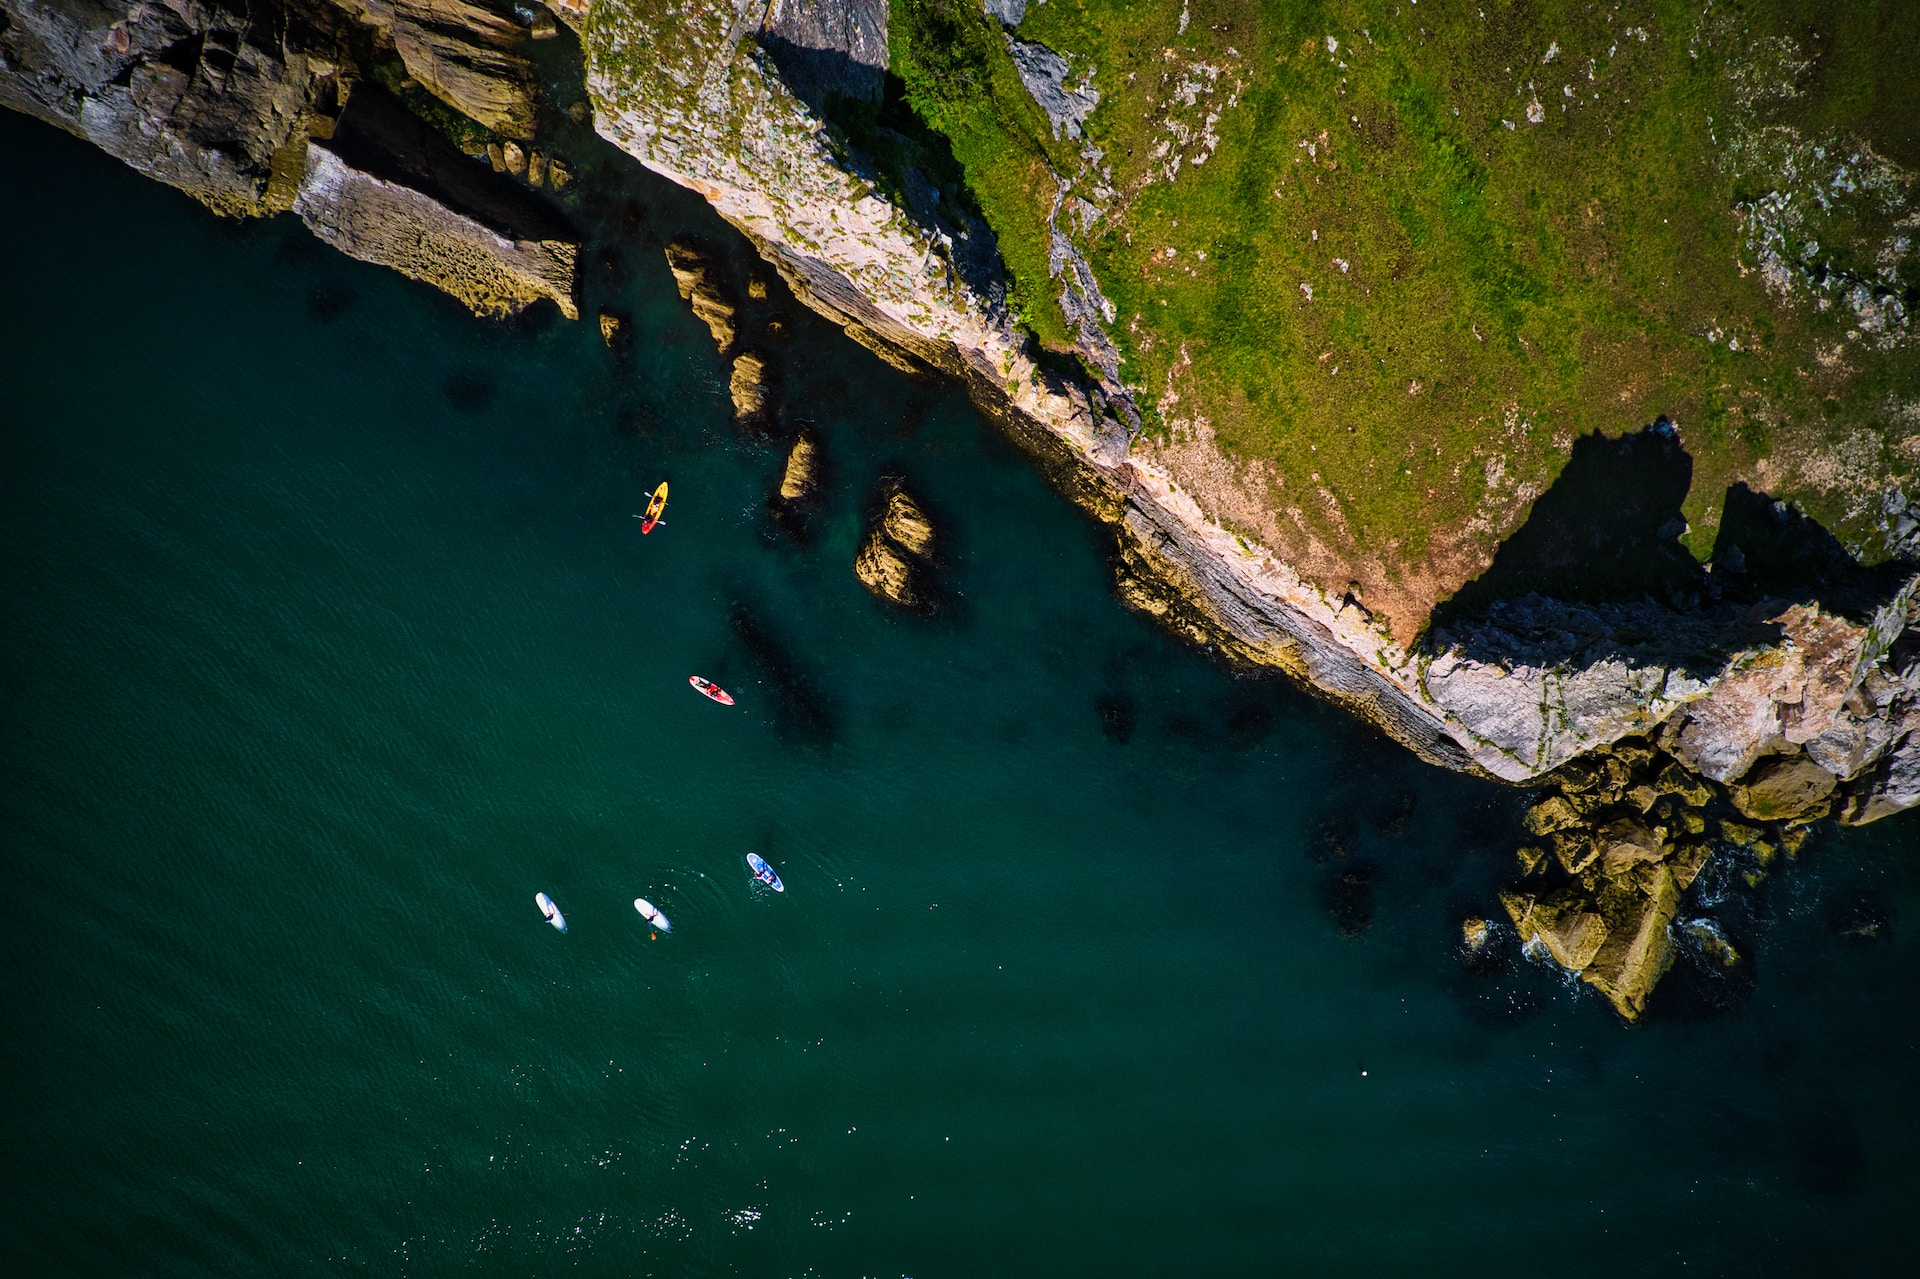 Kayaking, Canoeing & Paddleboard Locations in North Devon